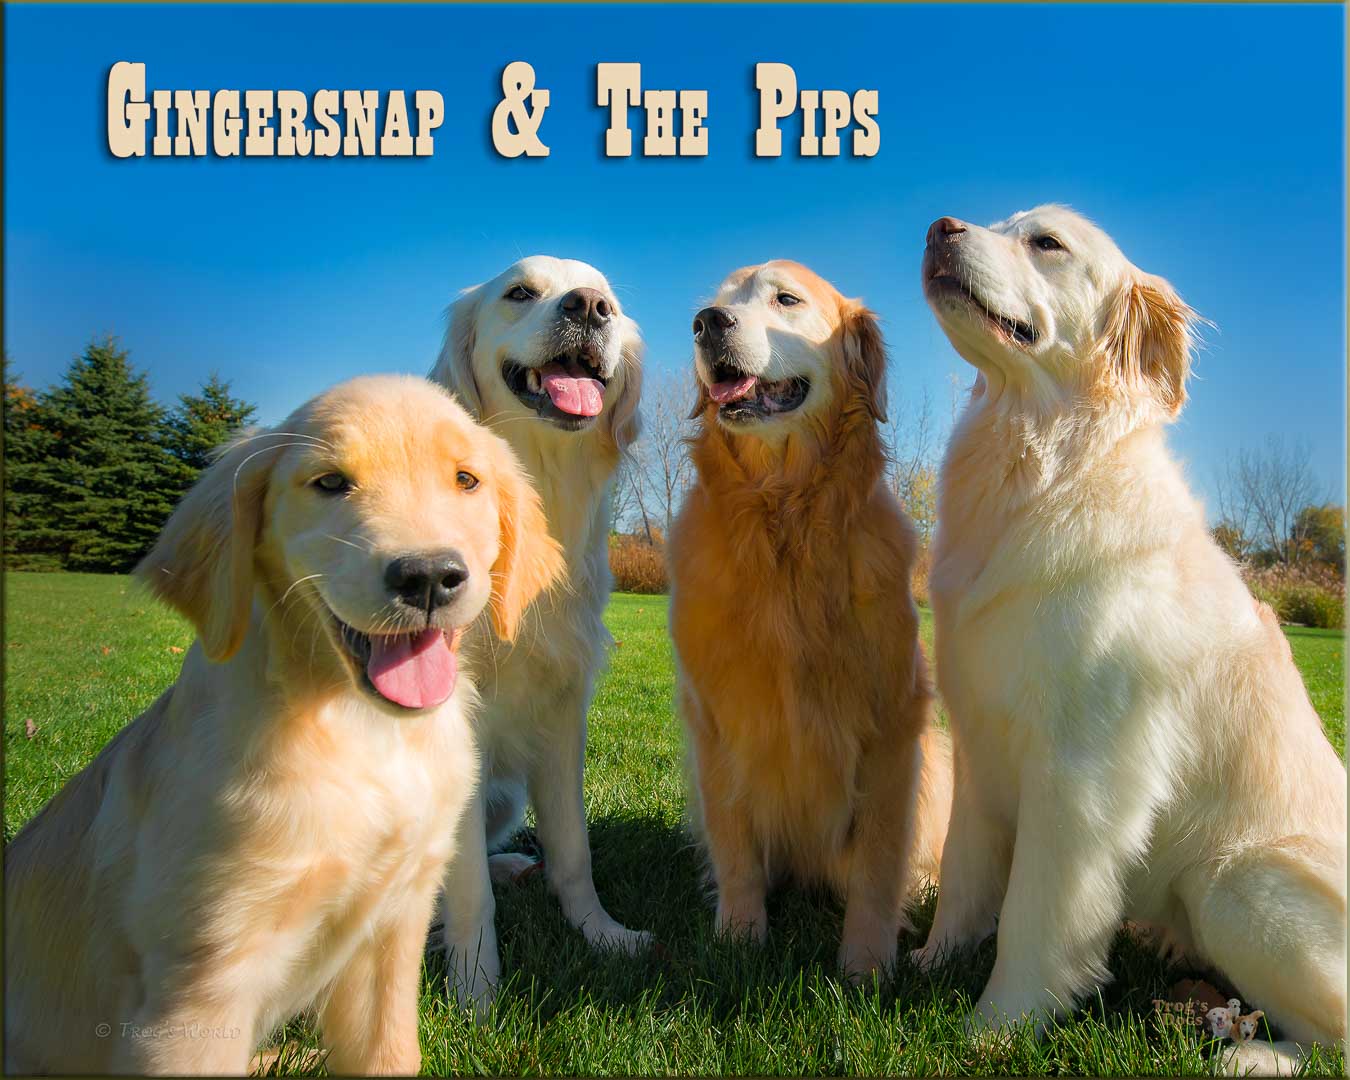 Four Golden Retrievers - Gingersnap and the Pips